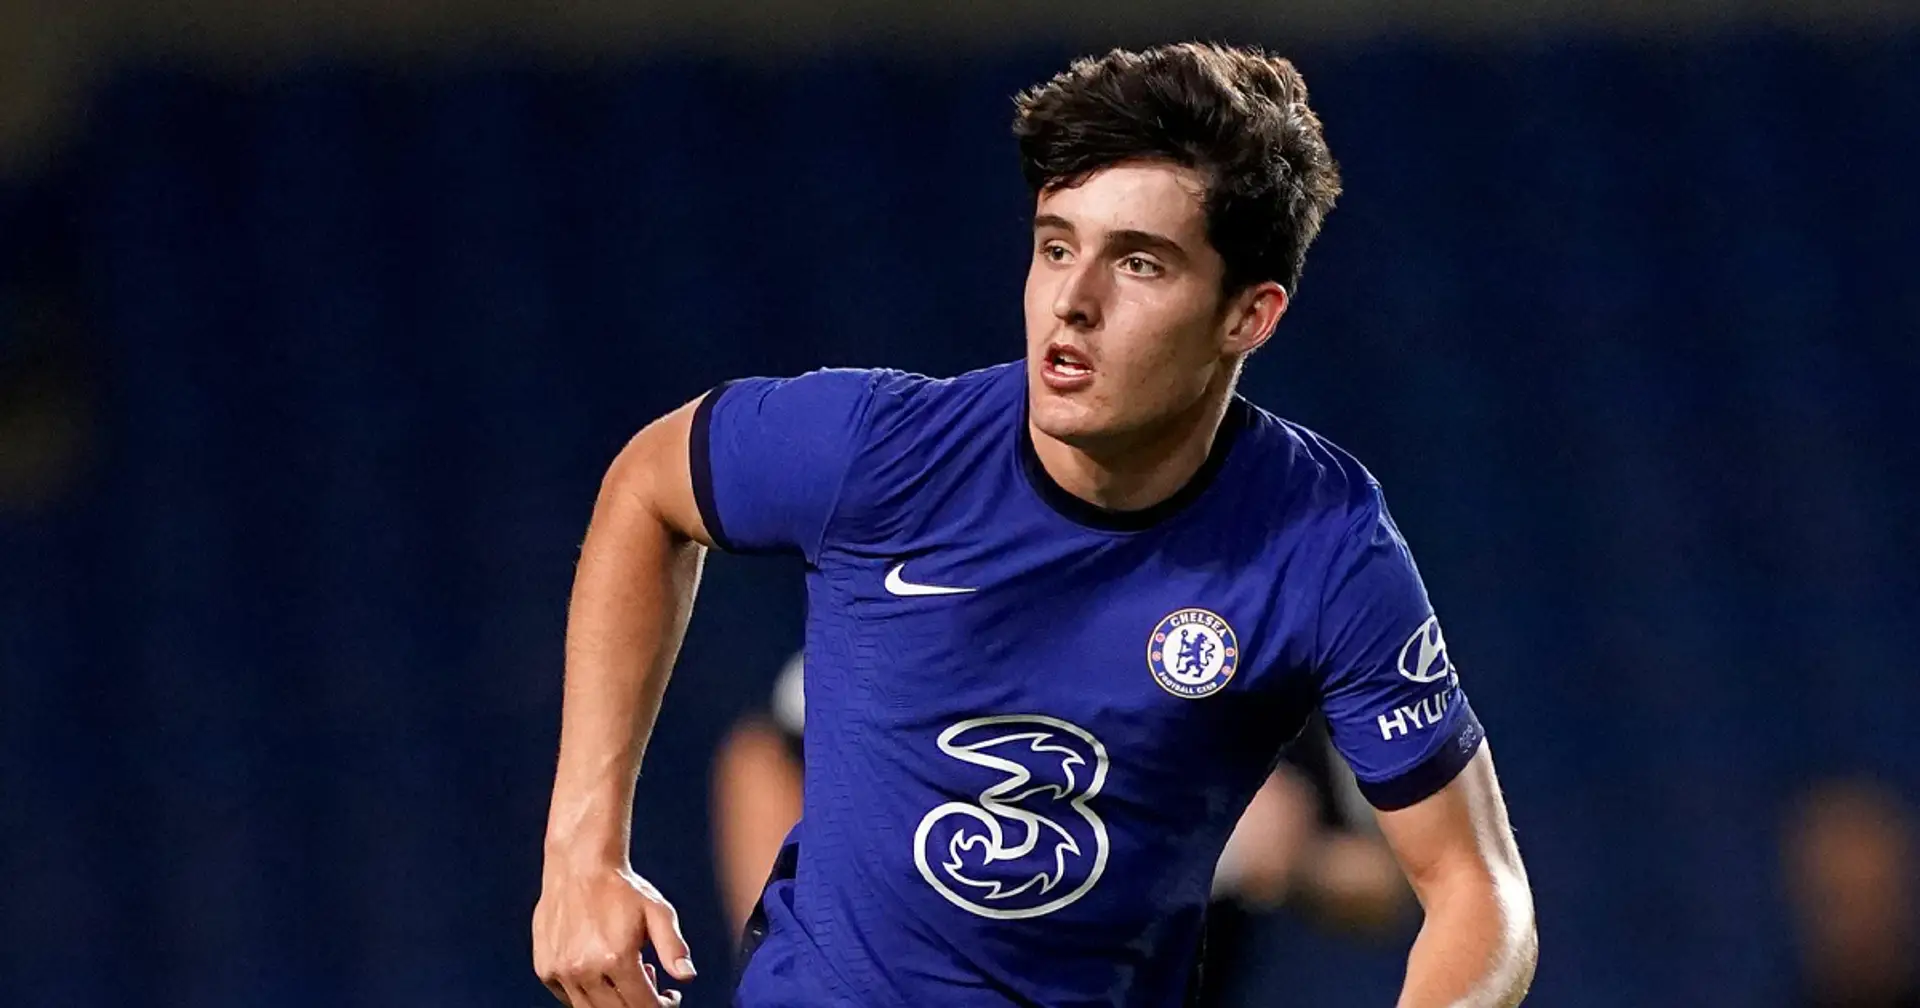 Chelsea under pressure to keep Academy Player of the Year Livramento amid interest from 5 clubs - Goal (reliability: 5 stars)